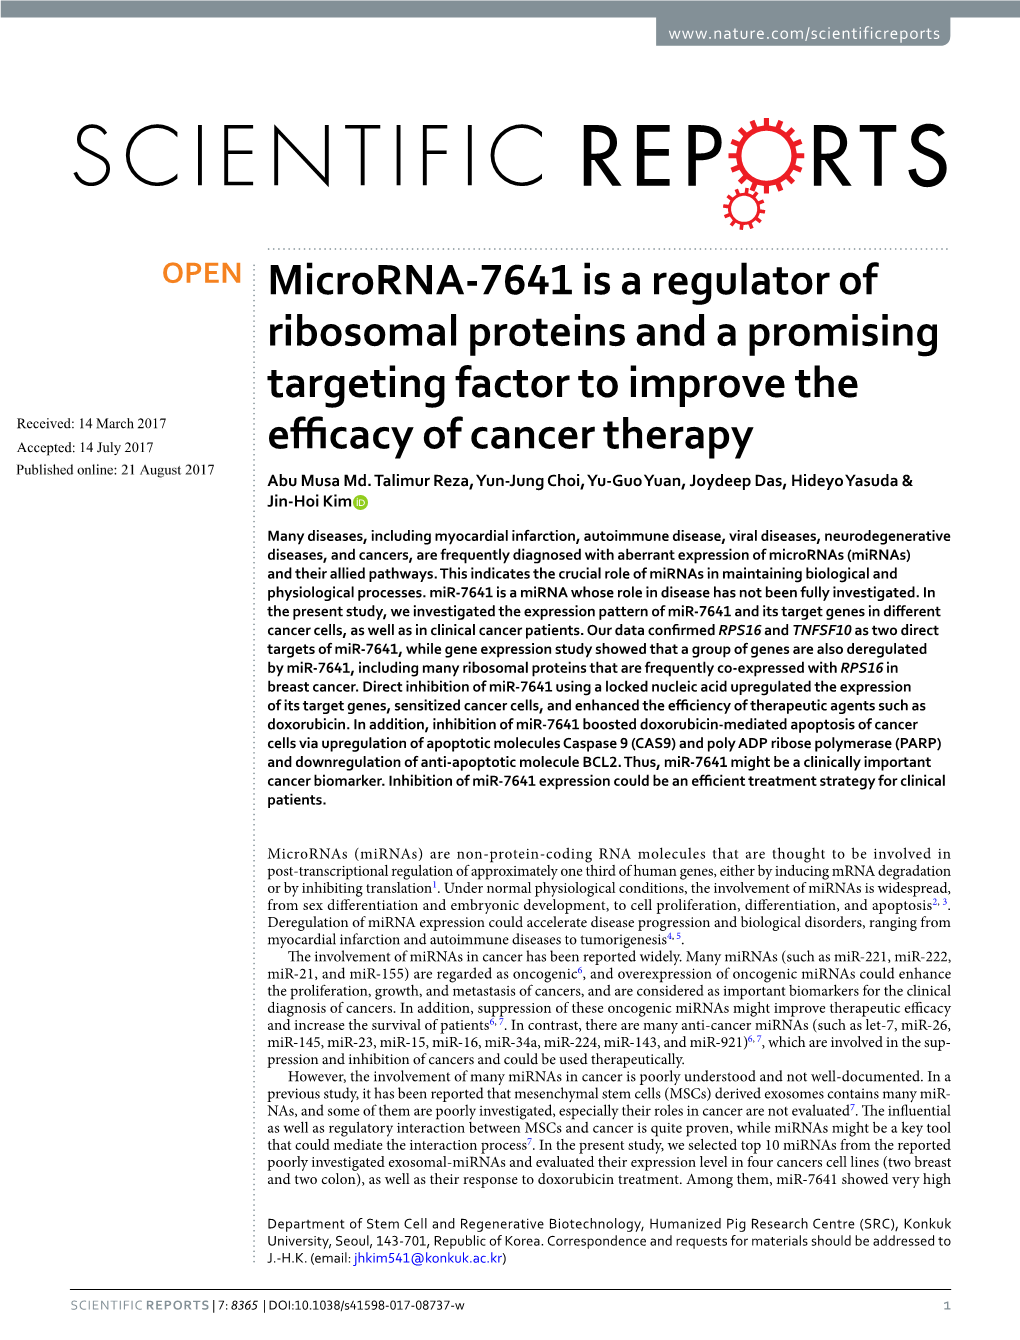 Microrna-7641 Is a Regulator of Ribosomal Proteins and a Promising